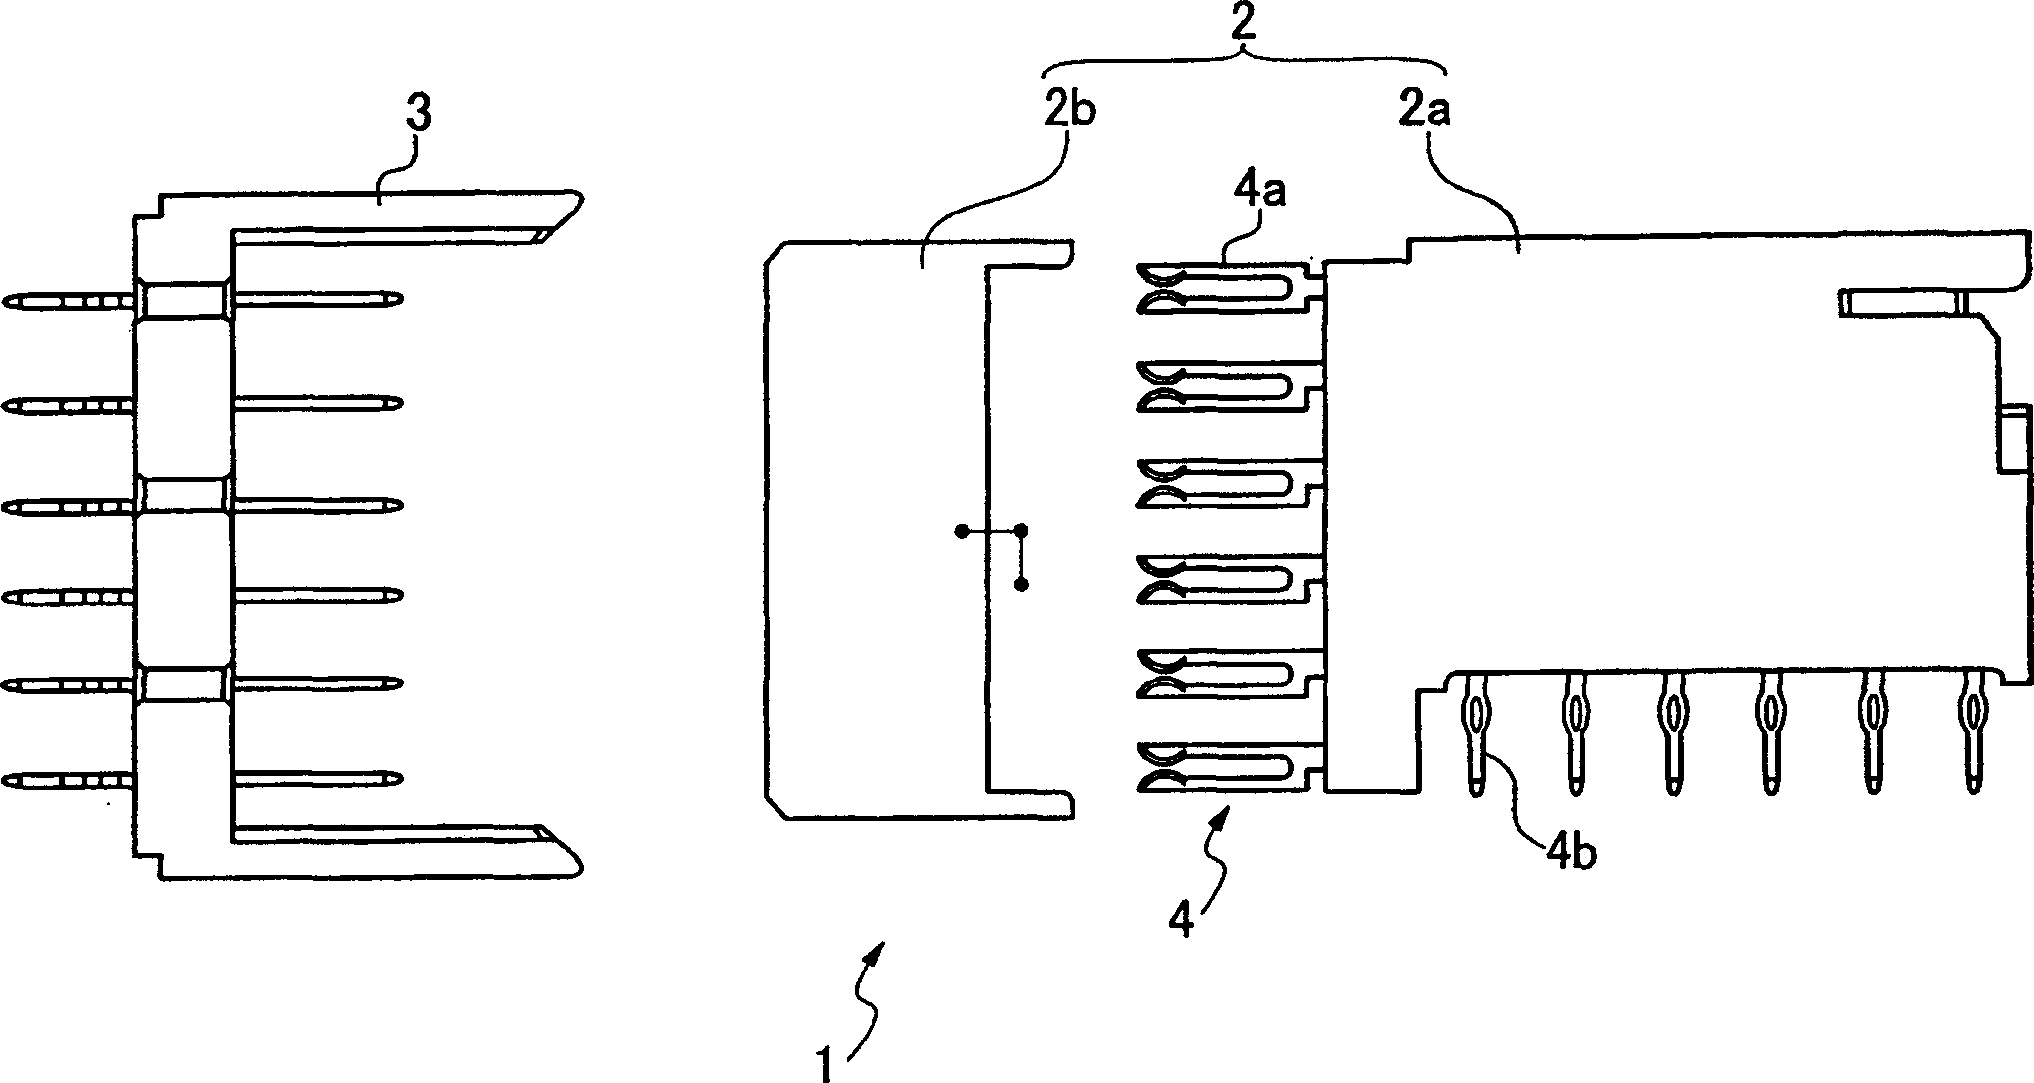 Electric connector and paired contact